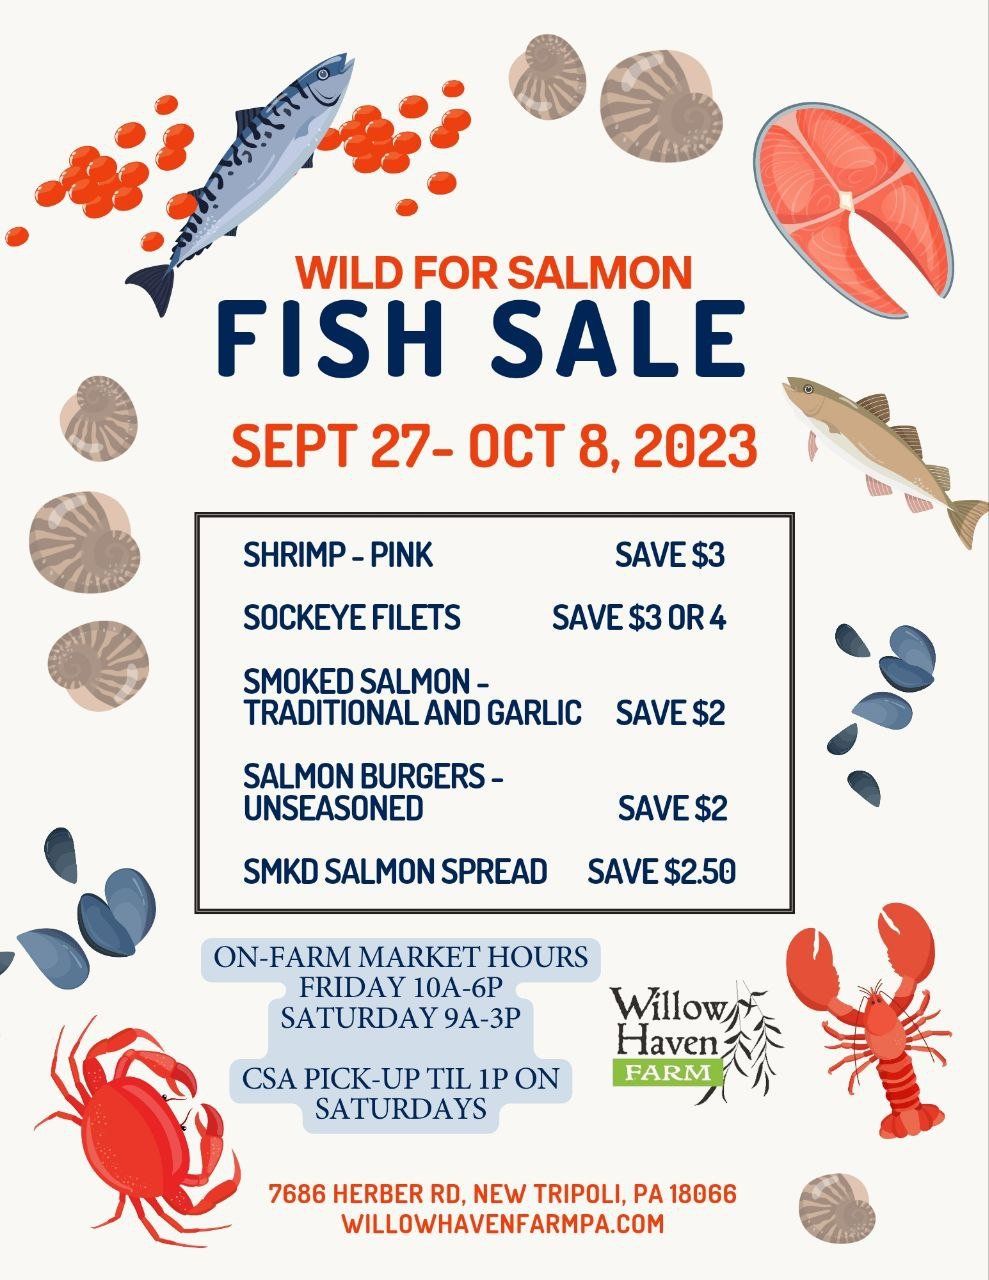 Next Happening: Wild for Salmon Sale + Enjoy Fall veggies and fruits!